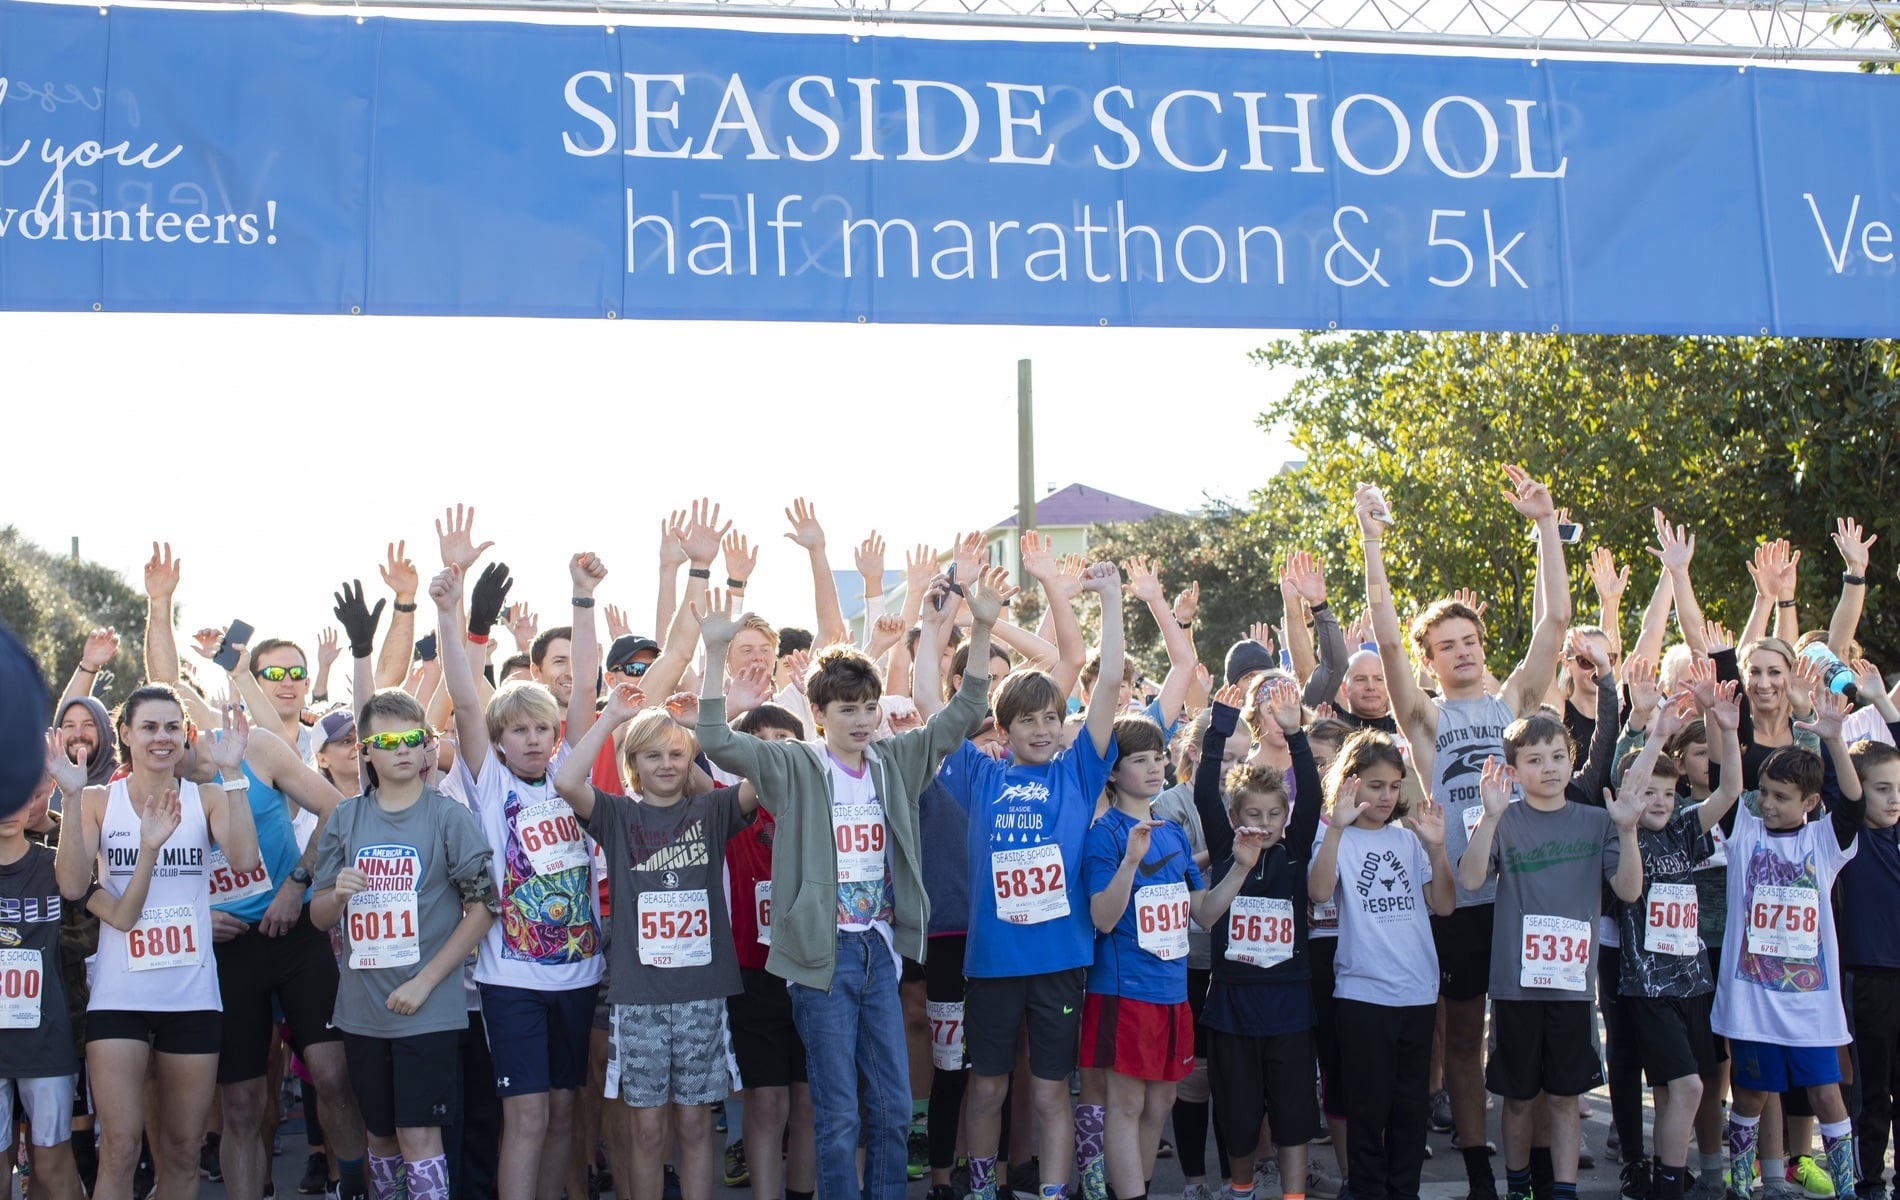 Thousands of Runners Take to the Streets for the Seaside School Half Marathon & 5K